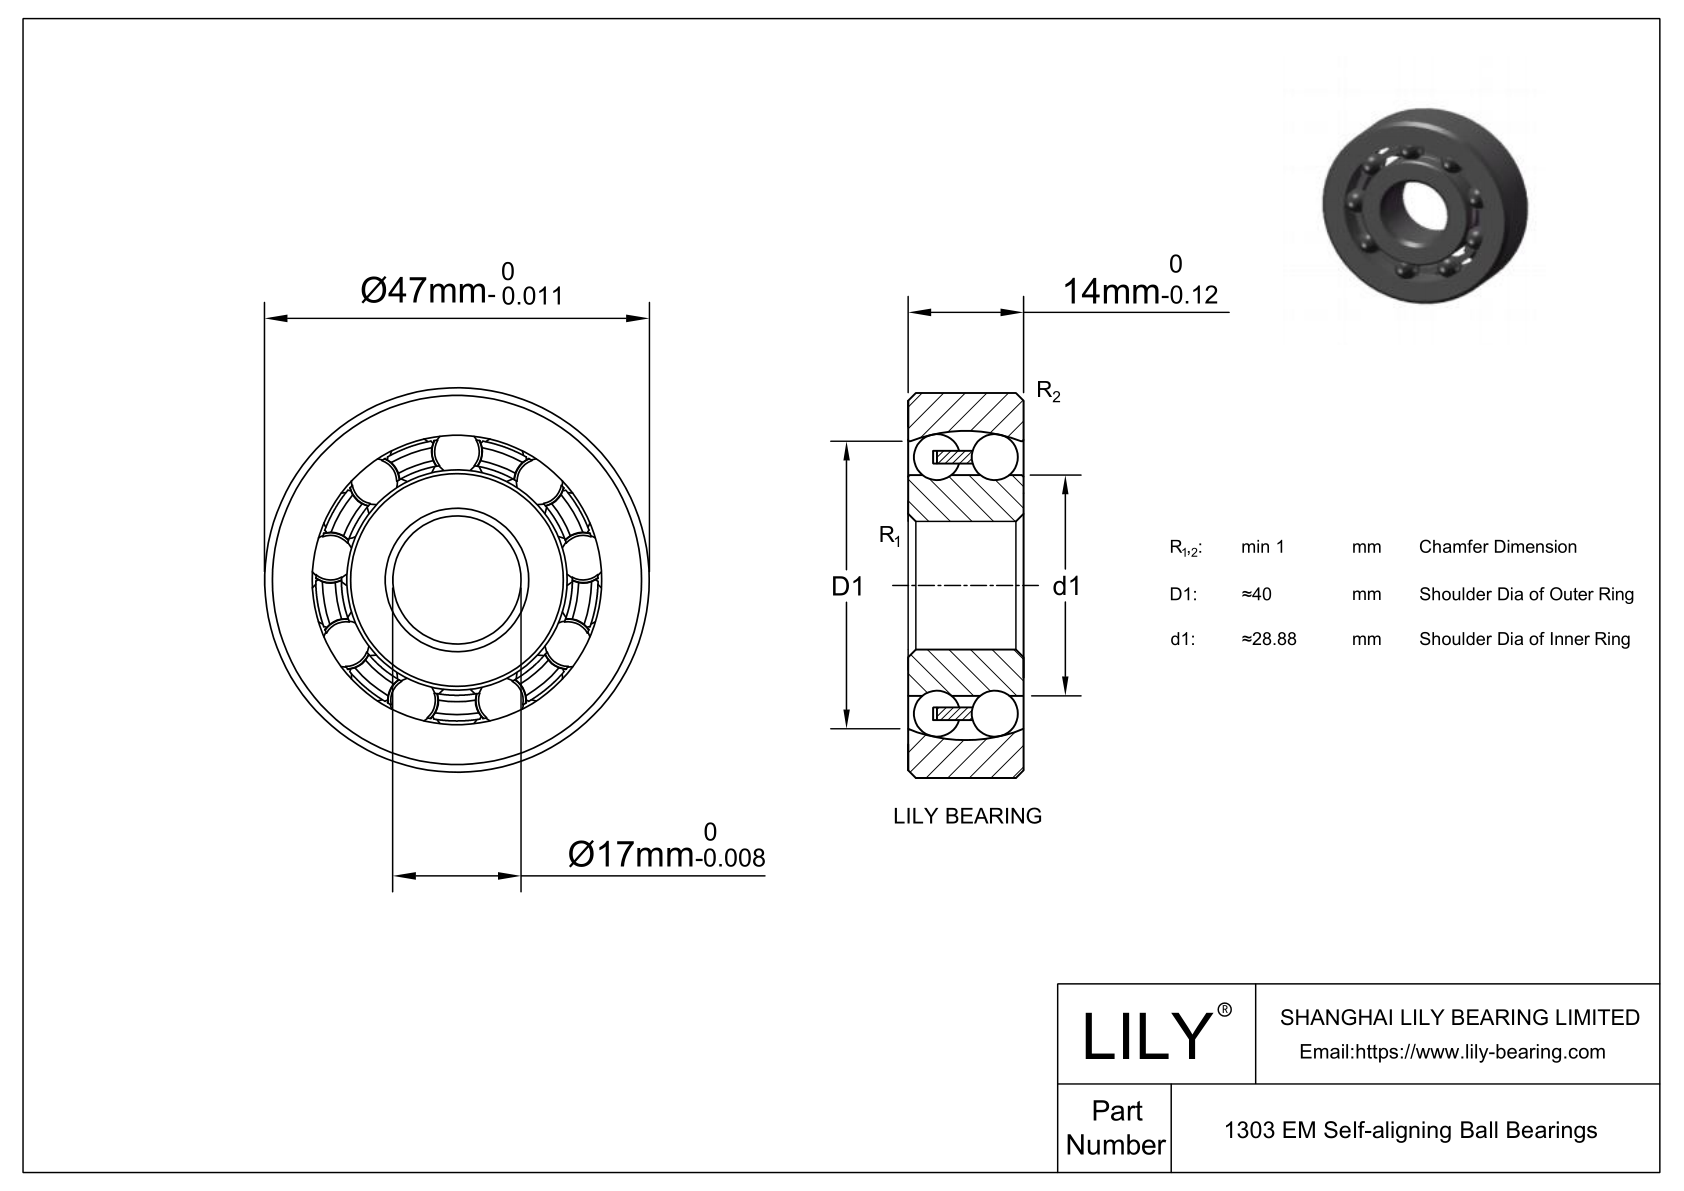 S1303 EM Stainless Steel Self Aligning Ball Bearings cad drawing